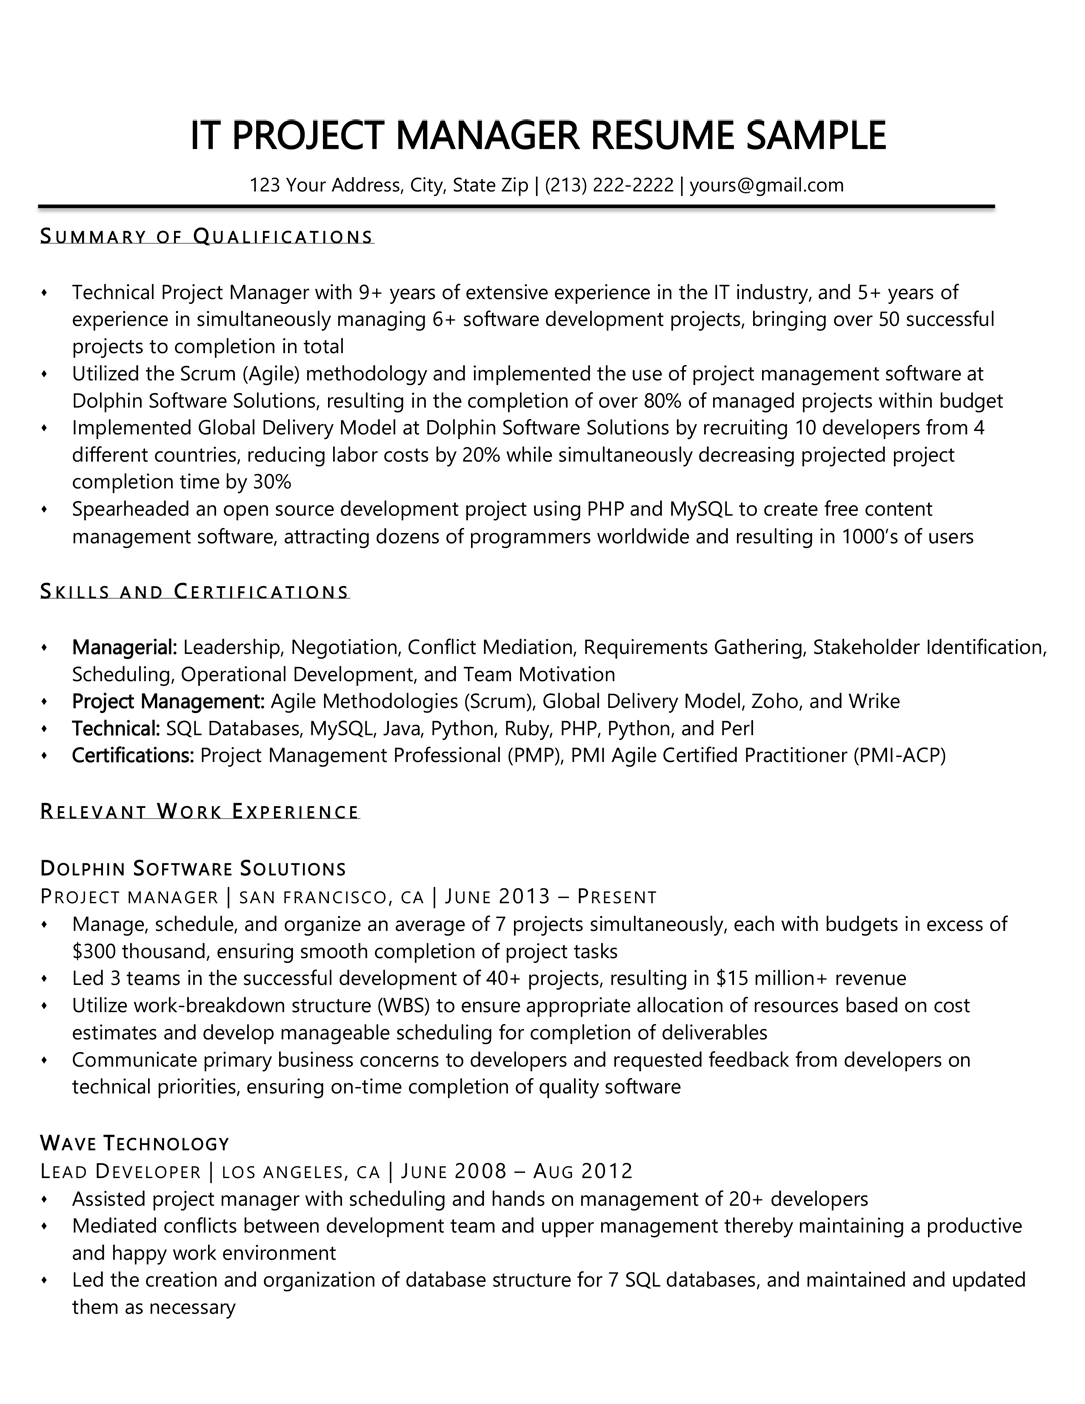 Mcmaster masters thesis guidelines